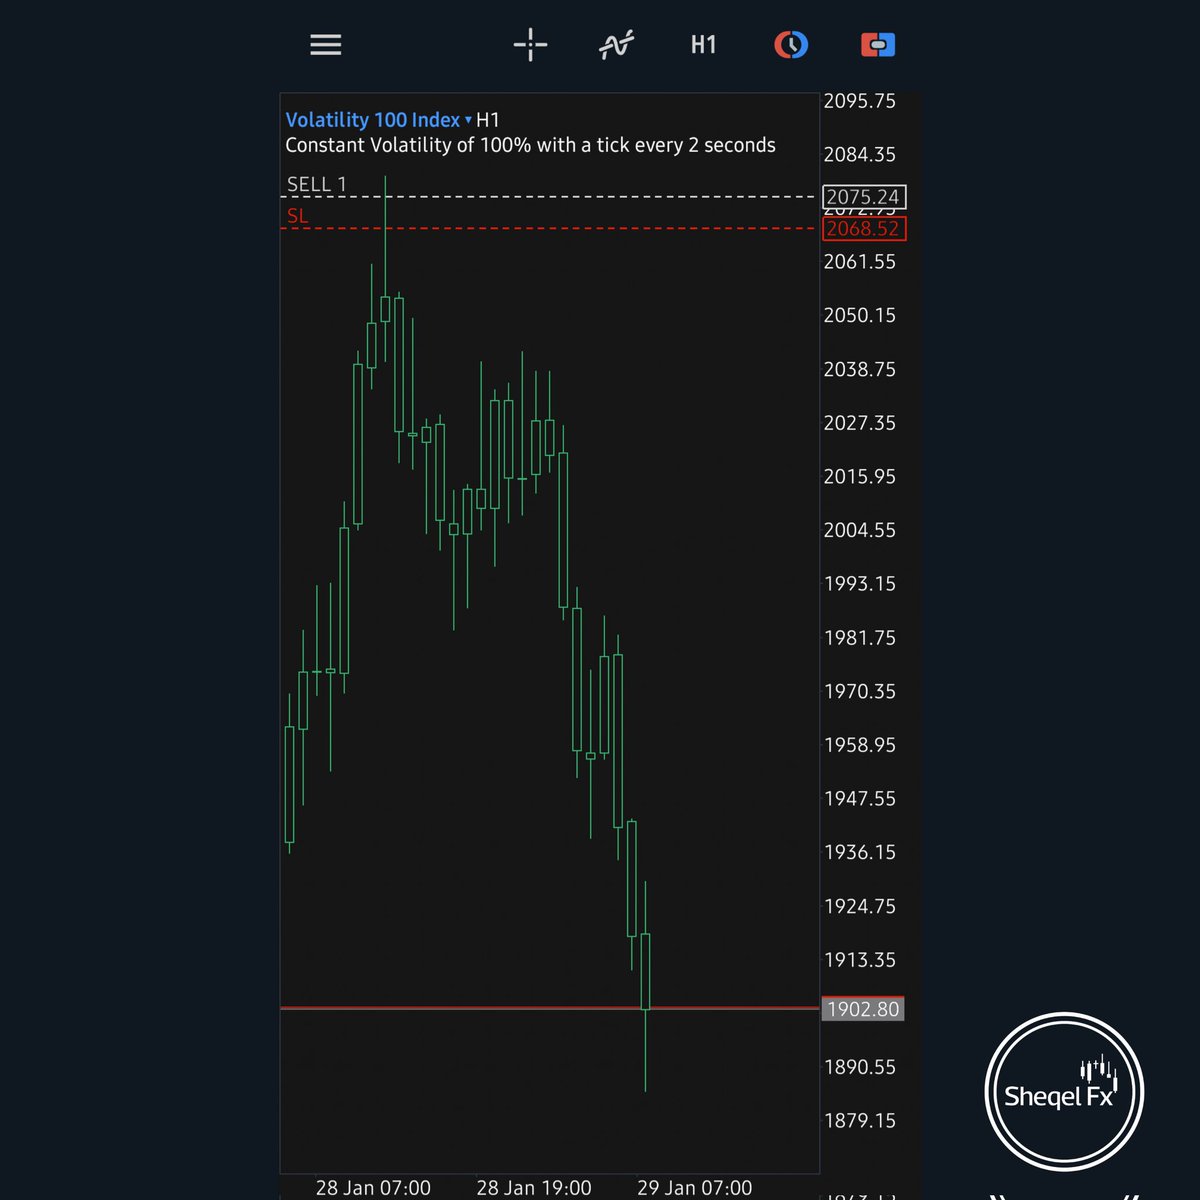 ⚠️VOLATILITY 100🎯

-Big drive downwards on V100📉
-Very proper entry too fetched from the wick✔️💯

#forex #syntheticindices #vix100 #forextrading #ForexMarket #volatility100index #deriv #forexlifestyle #TradingStrategy #crypto #Bitcoin #v75 #trading $vix